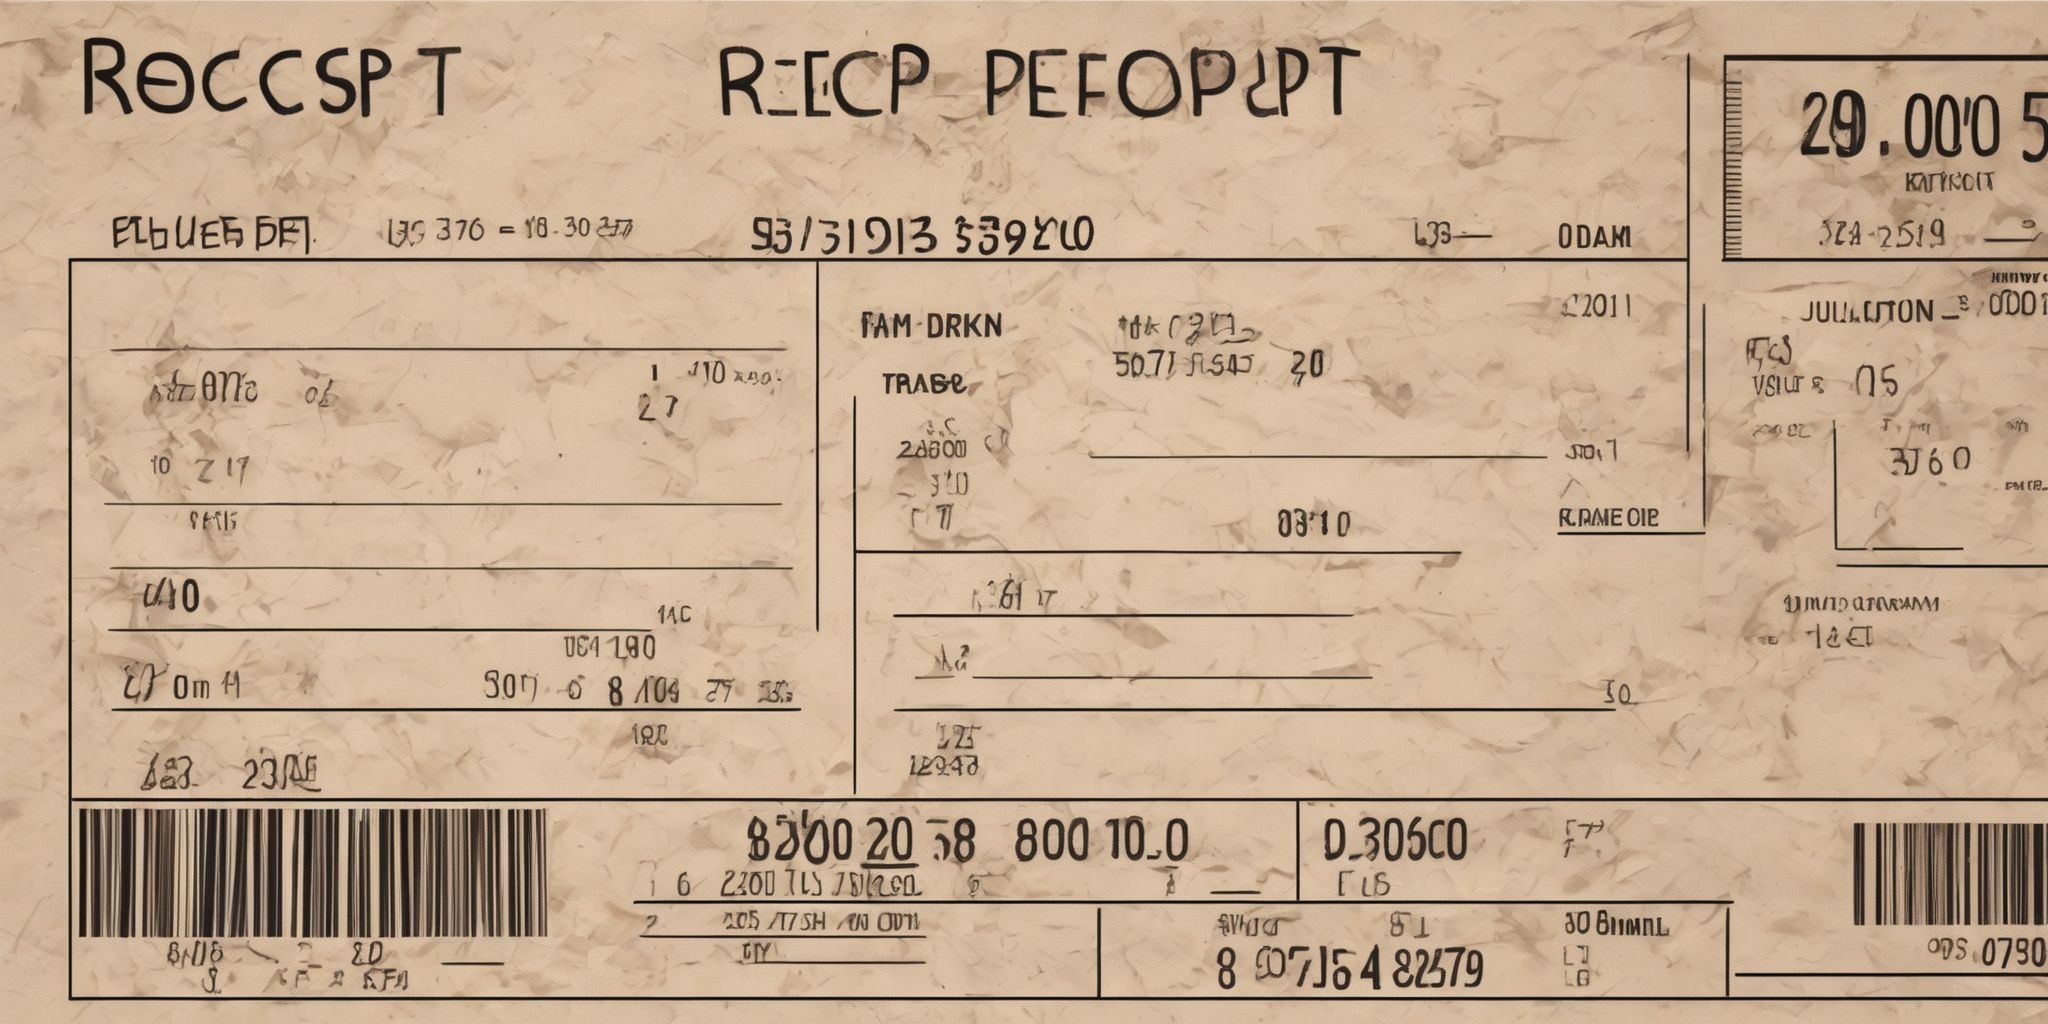 Receipt  in realistic, photographic style